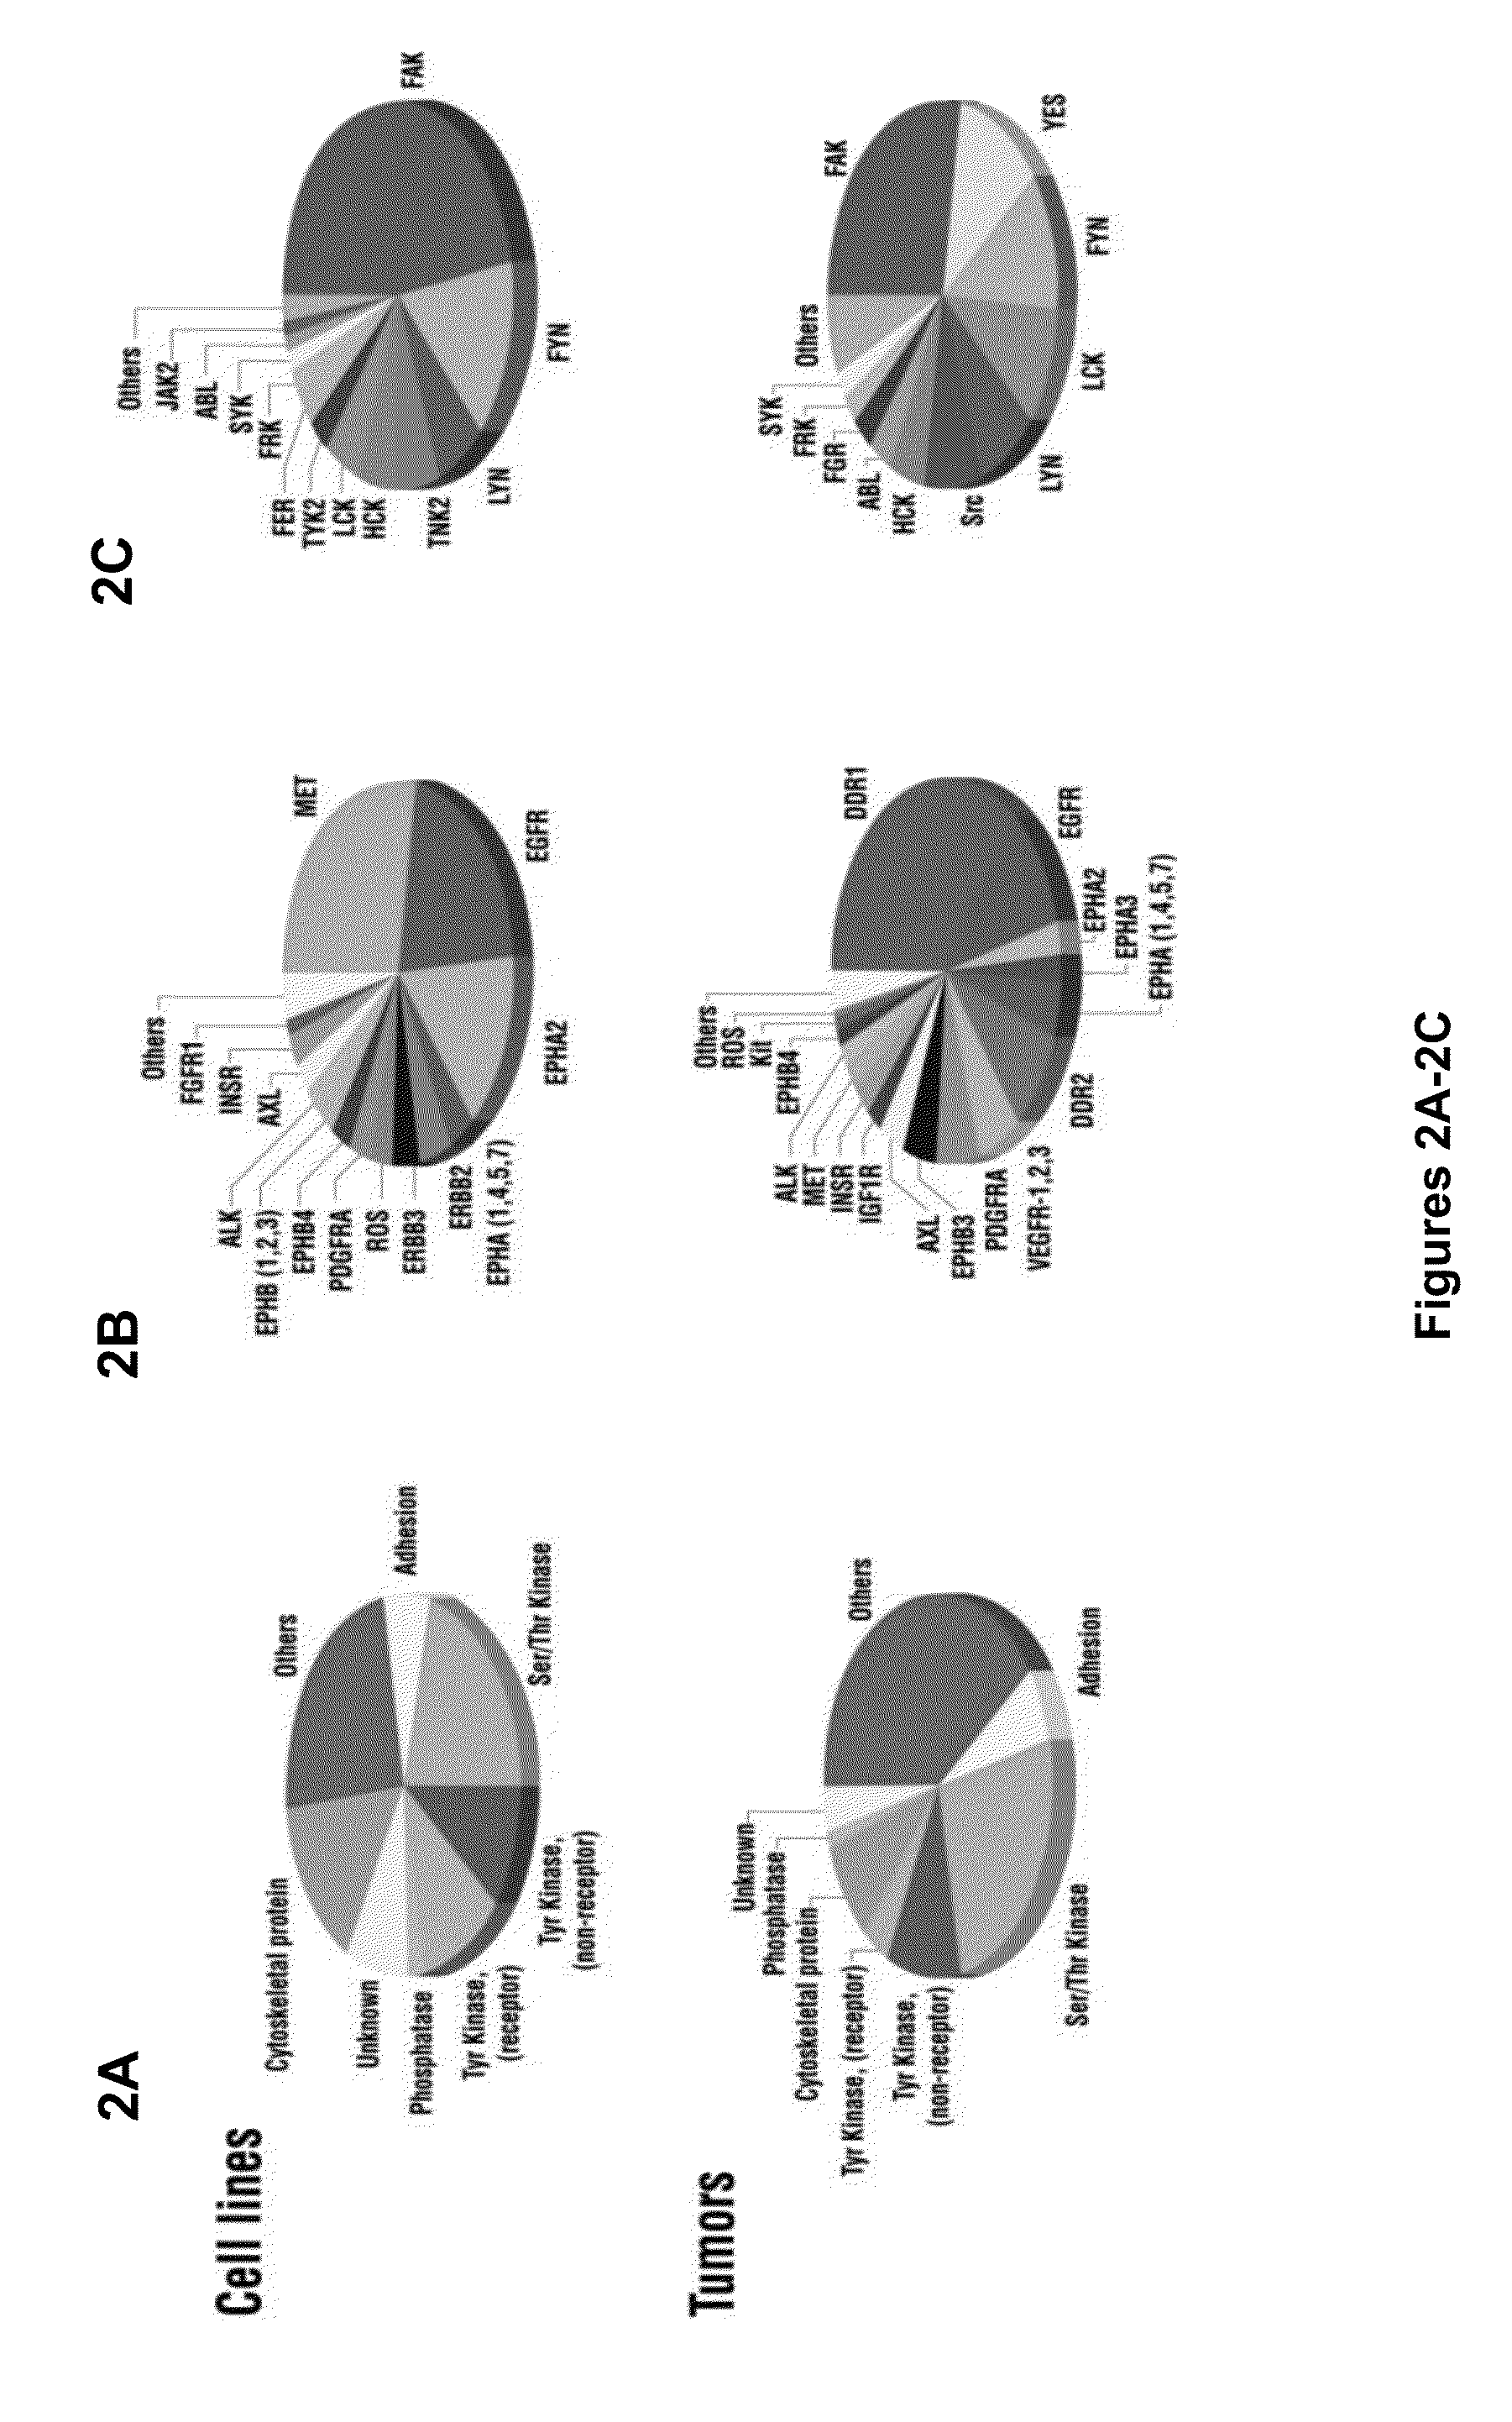 Cancer classification and methods of use